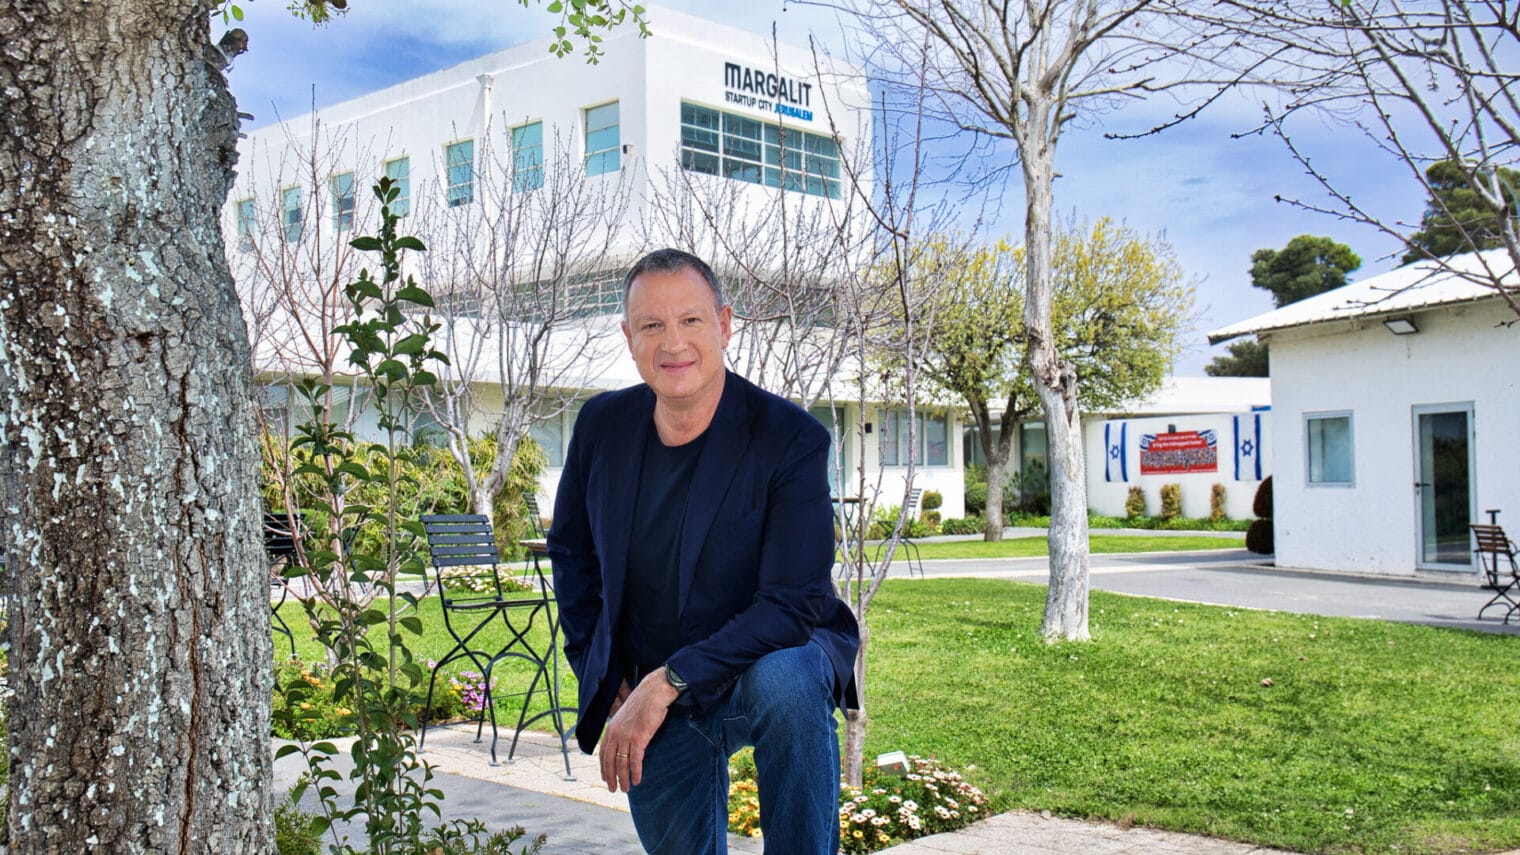 Erel Margalit, chairman of JVP and Margalit StartUp City, outside his offices in Jerusalem. Photo by Noam Chen